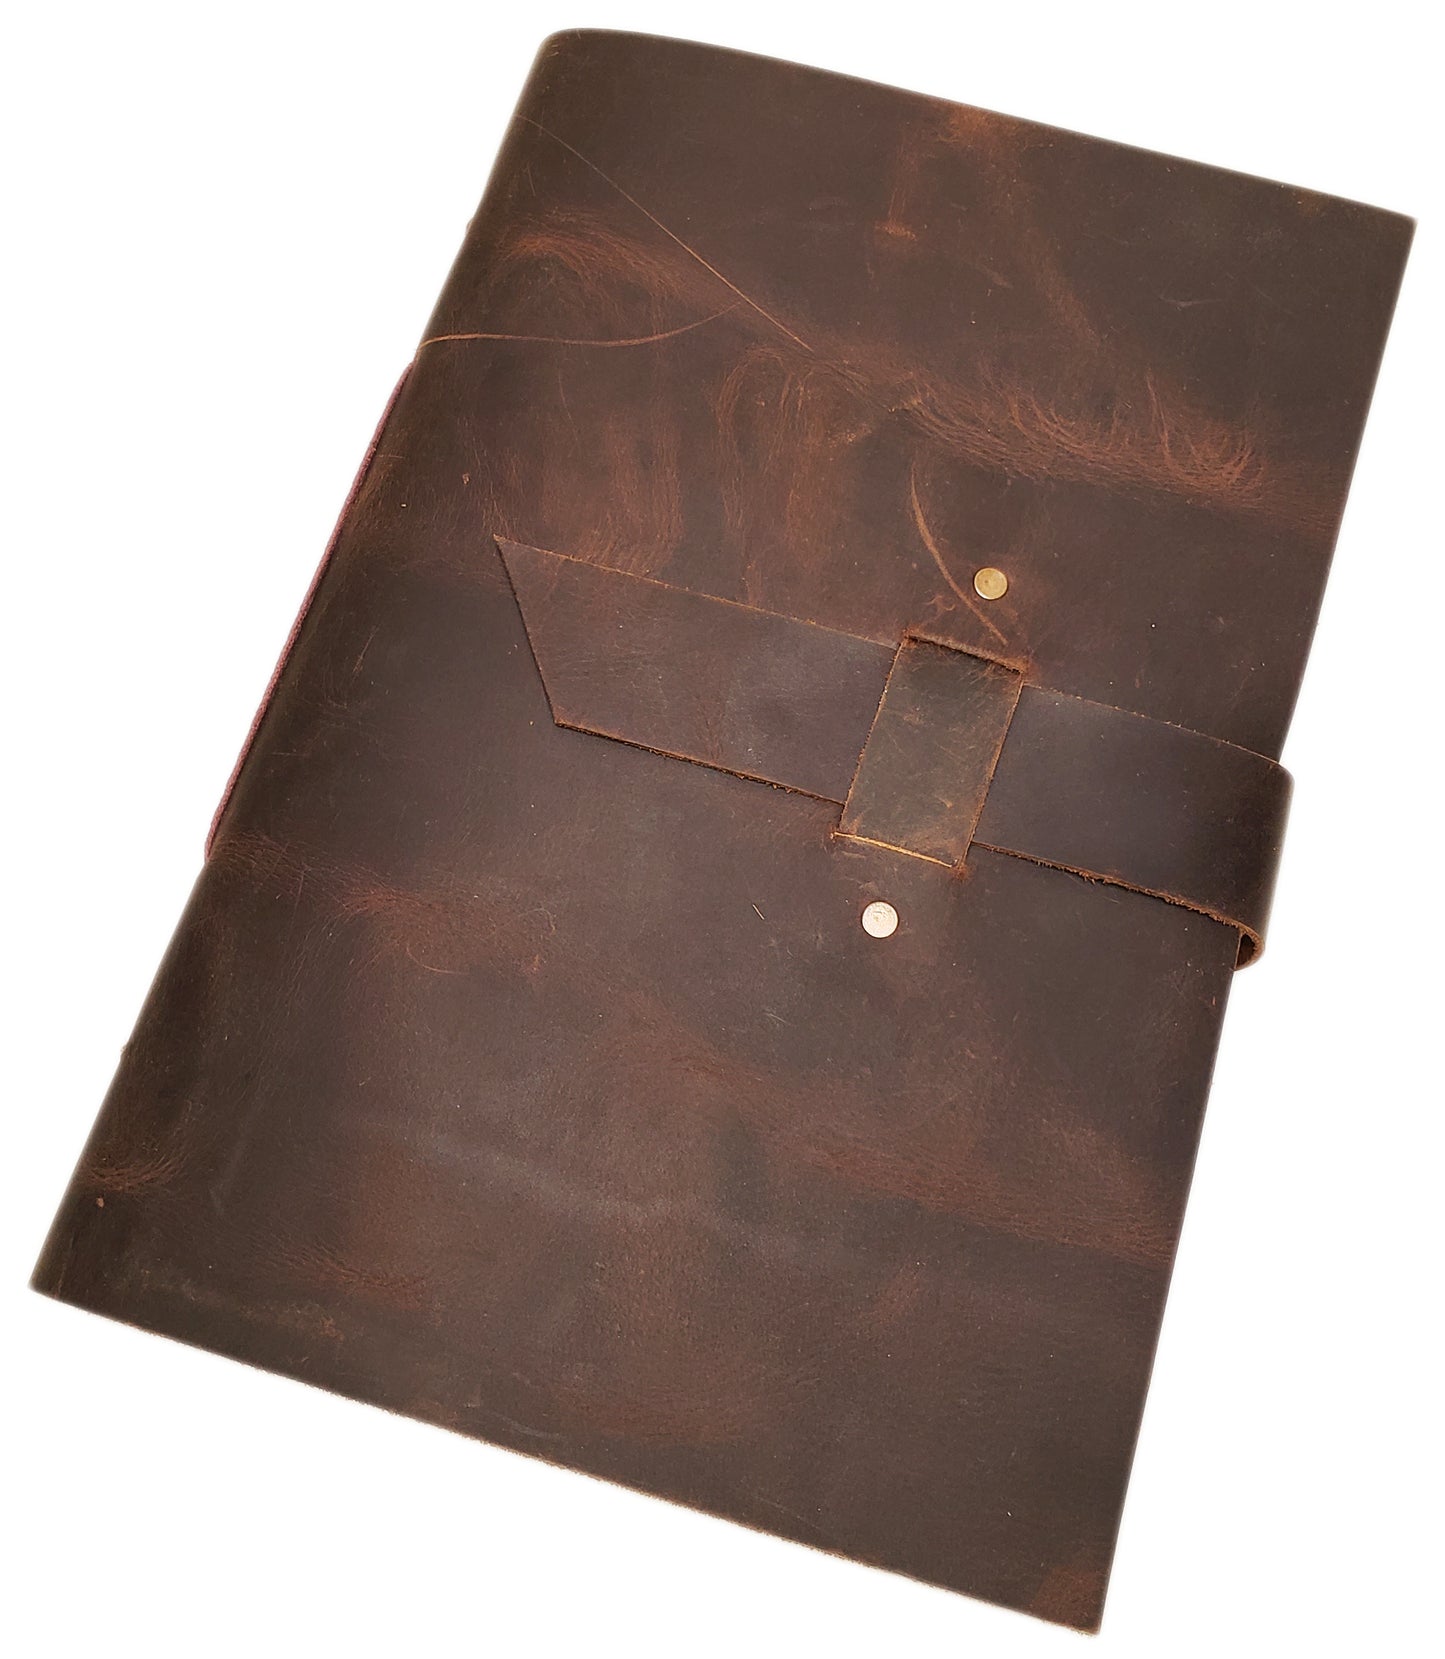 Large Vintage Leather Scrapbook Photo Album with Gift Box - Holds 200 4x6 or 5x7 Photos - 9x12"